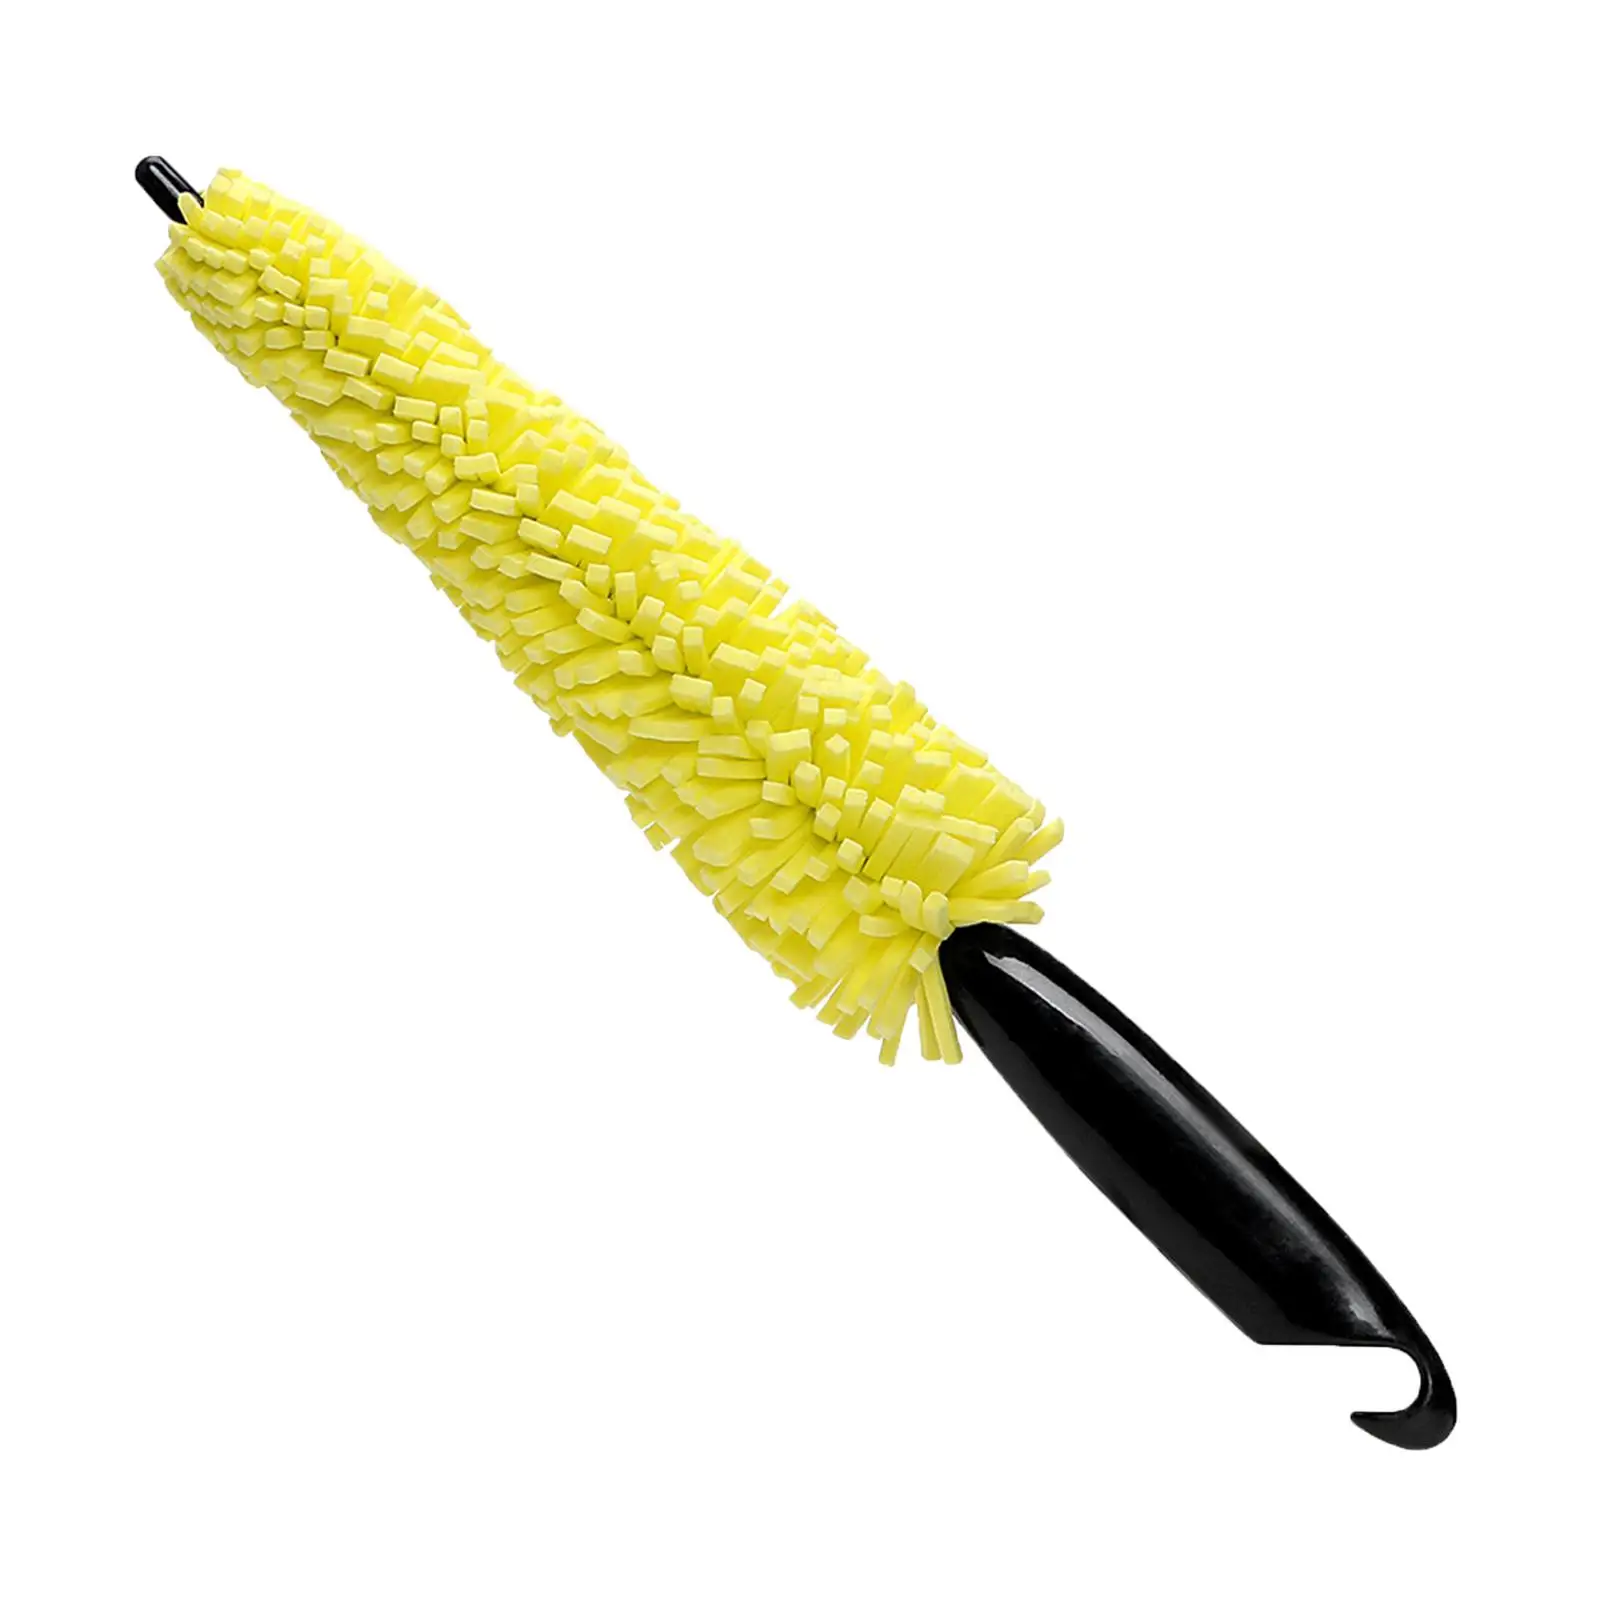 Car Wheel Tire Cleaning Brush Tool Rim Scrubber Detailing Brush Supplies for SUV